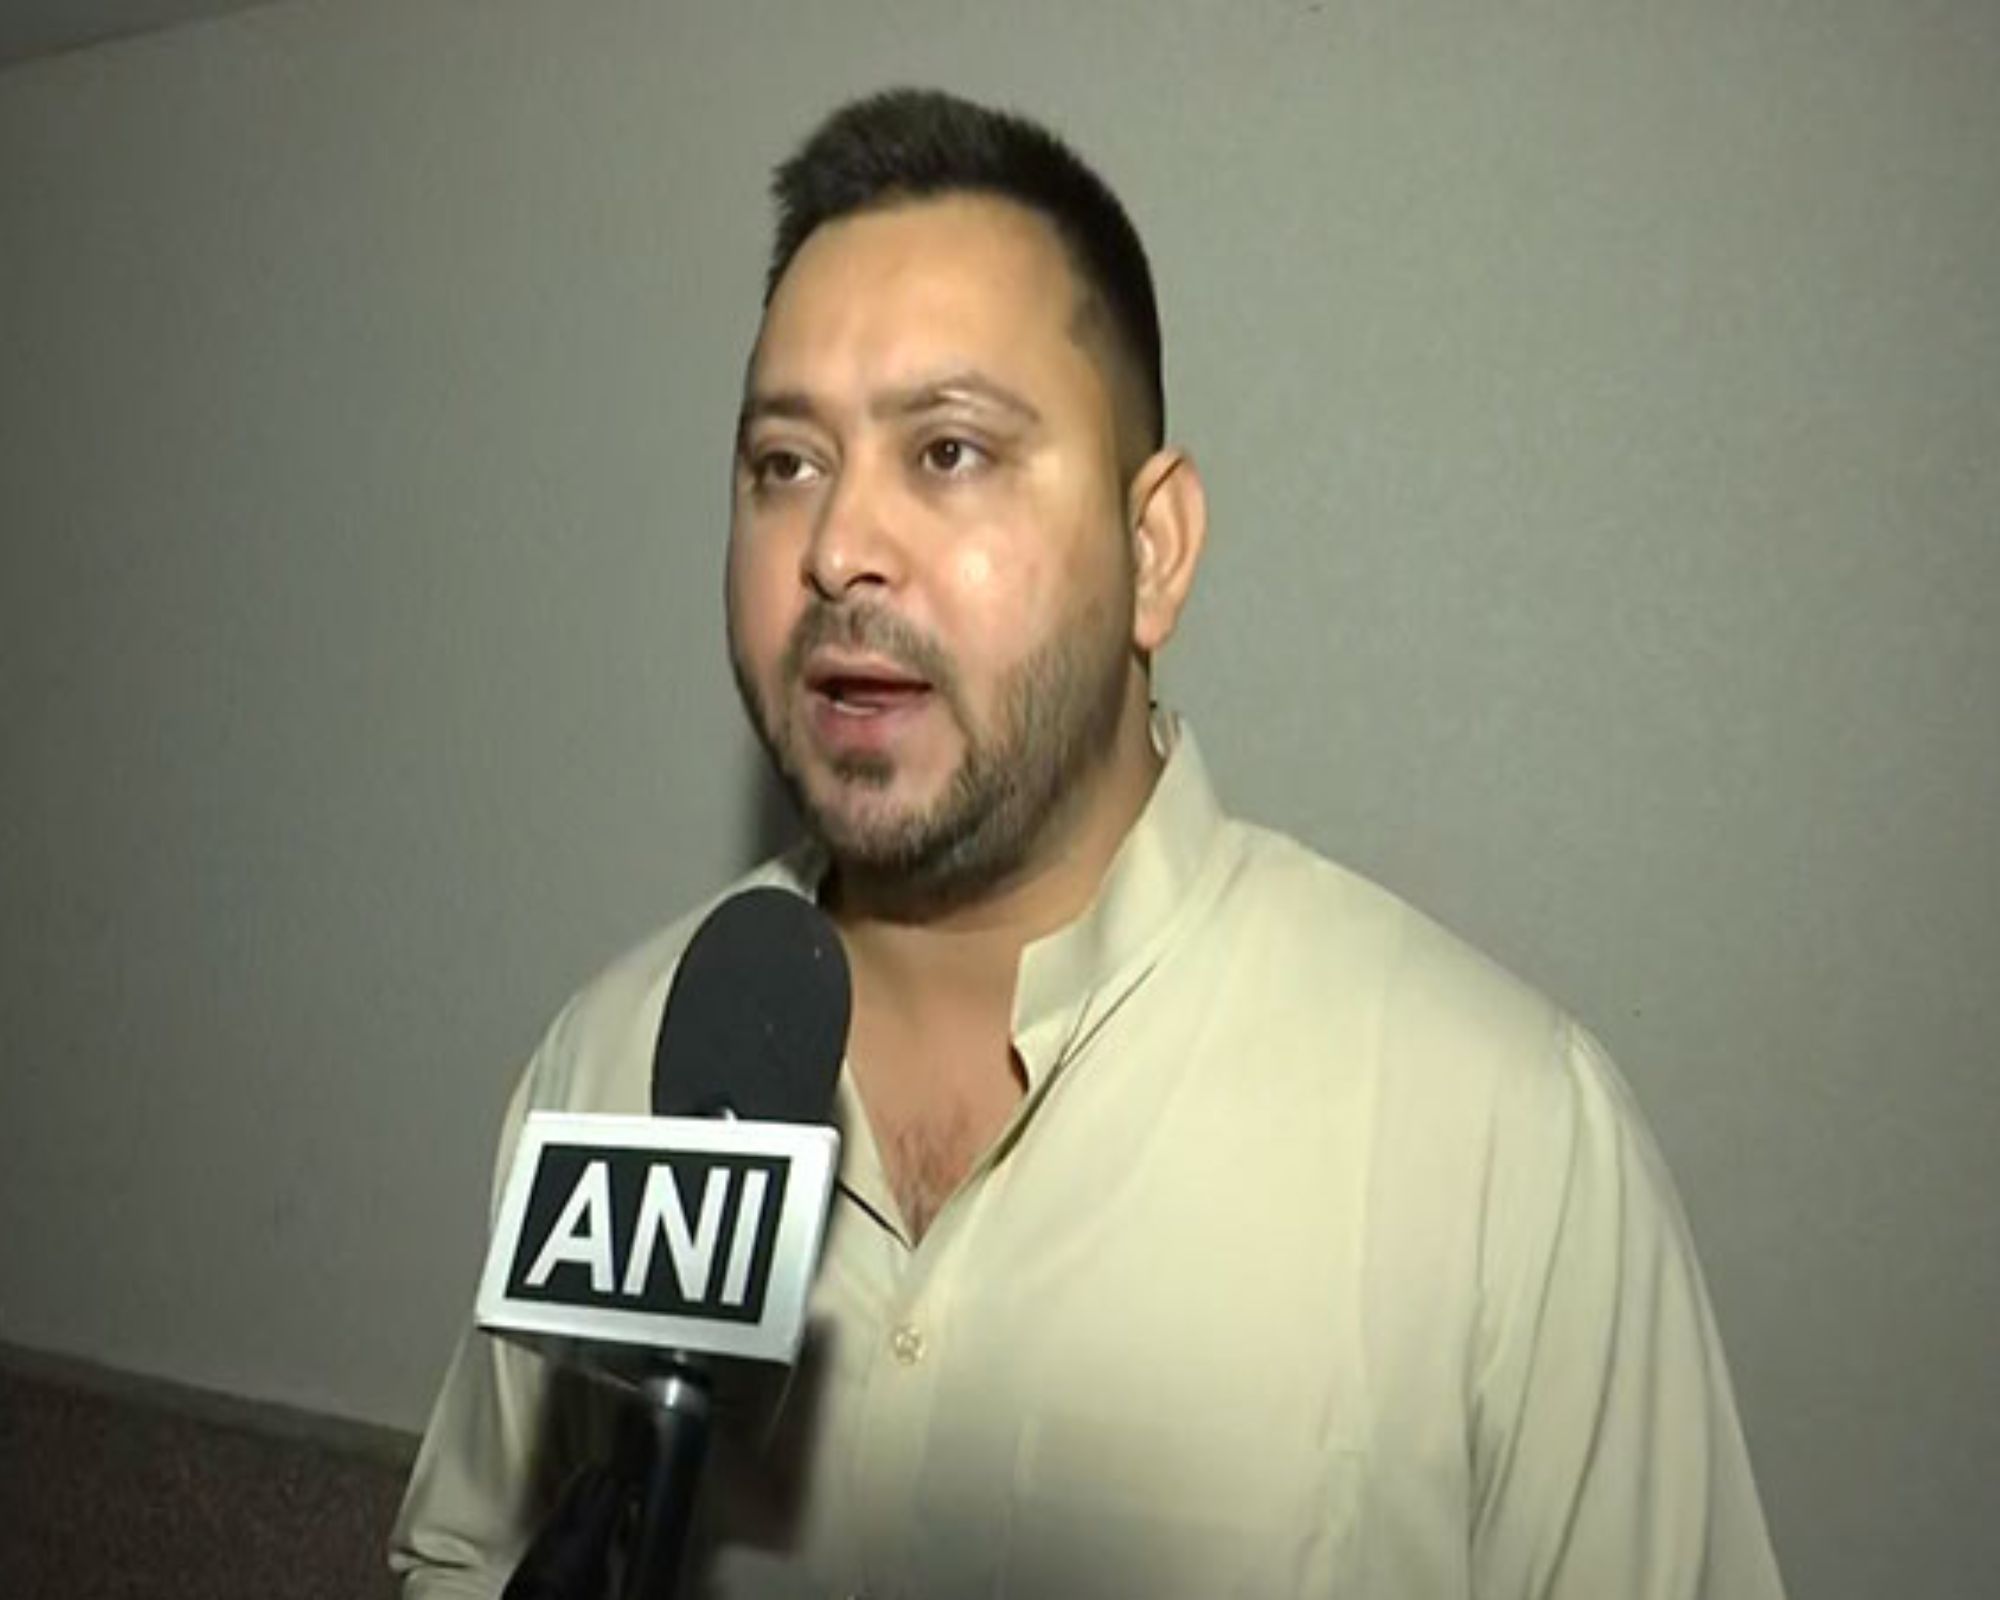 JD(U) will be finished in 2024: Tejashwi Yadav’s first reaction after Nitish Kumar coup